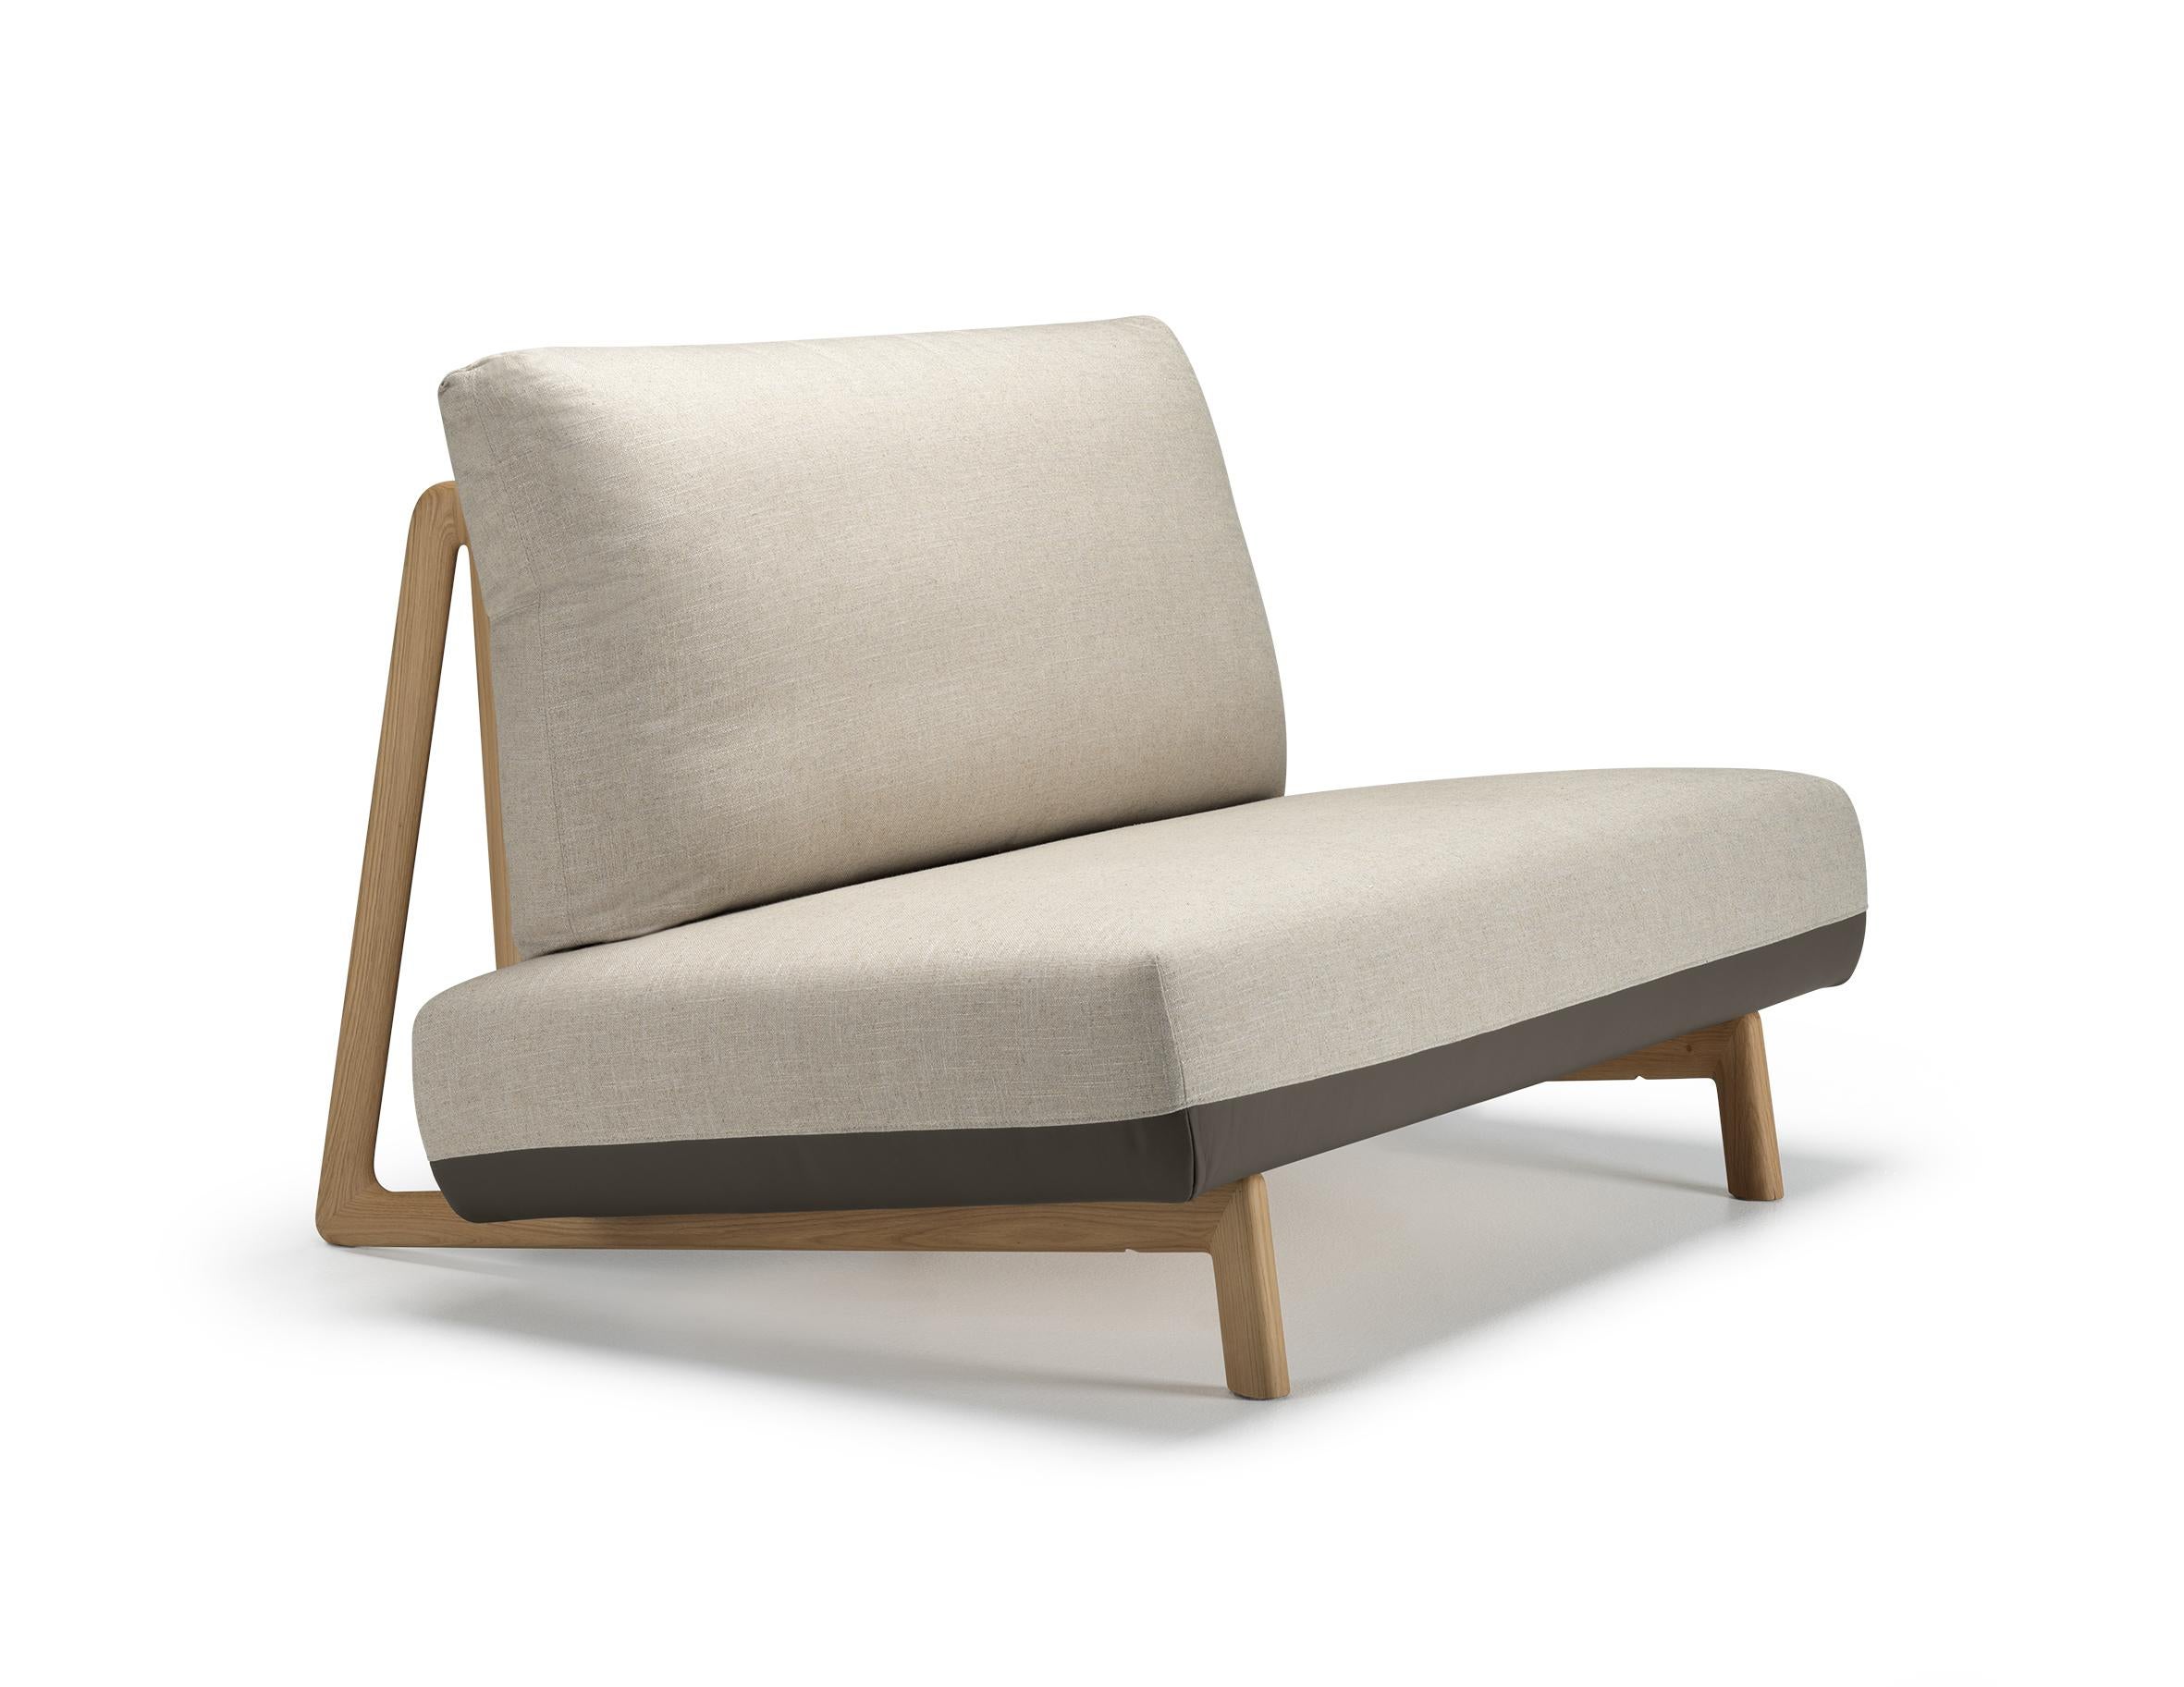 Alias D10 Trigono Armchair in Beige Upholstery with Natural Oak Frame by Michele De Lucch

Armchair with structure in solid oak andÂ belts in fabric or leather.Seat and back combined with removable cover in fabric or leather.NOTES: the seat has a